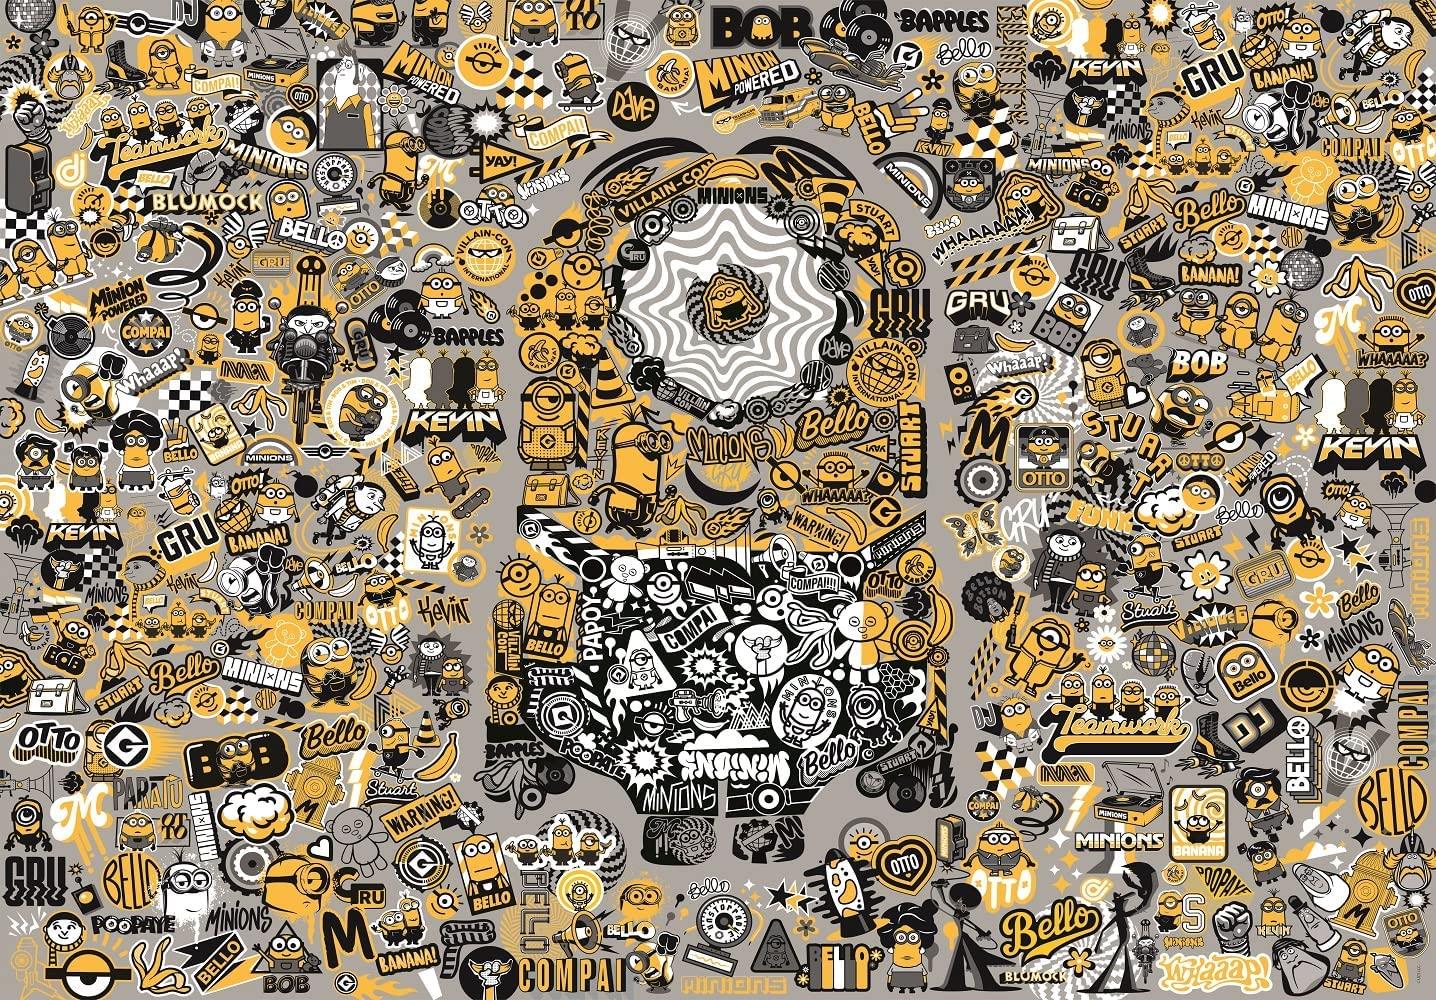 Clementoni Impossible Minions Jigsaw Puzzle (1000 Pieces)